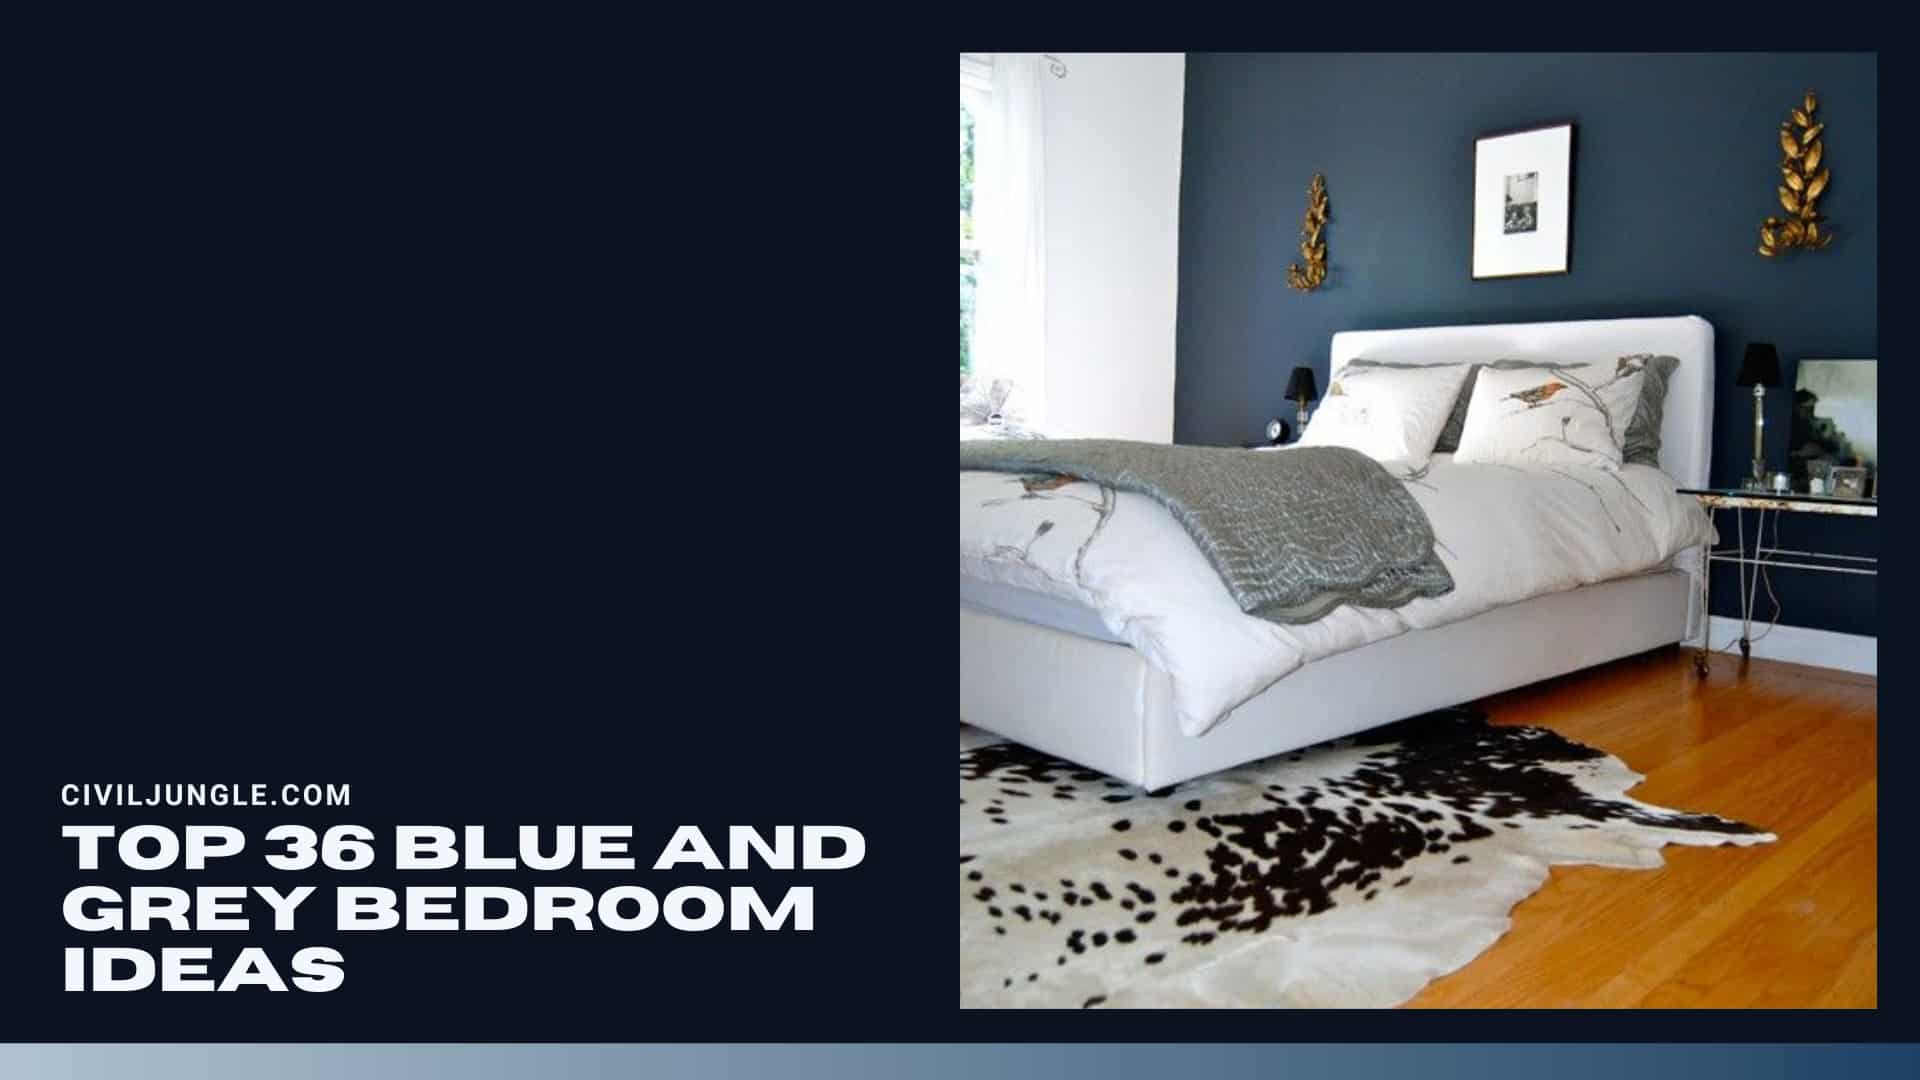 Top 36 Blue and Grey Bedroom Ideas